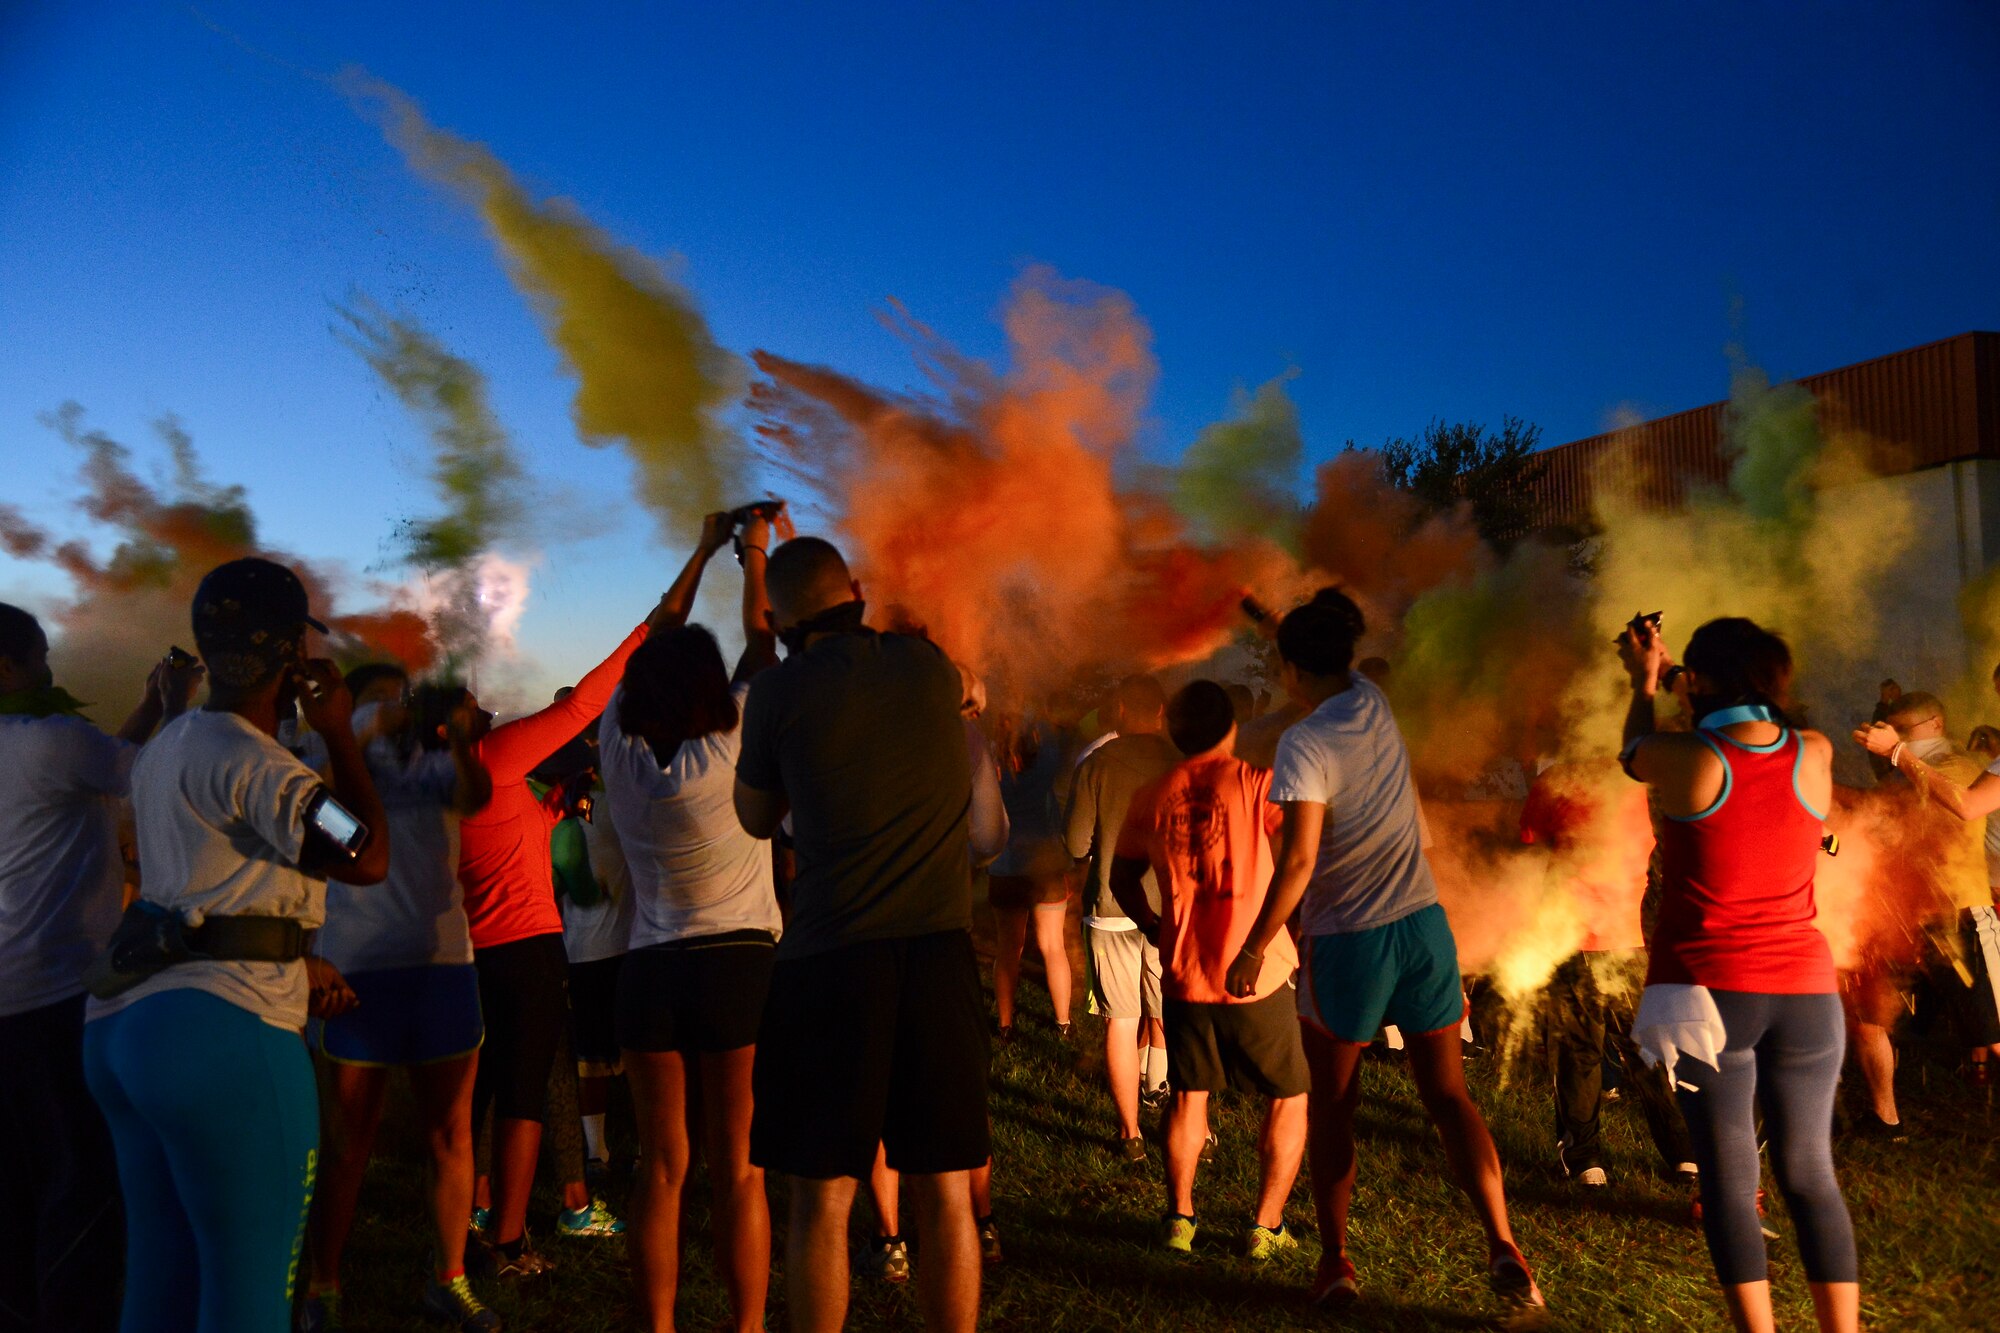 A crowd of participants burst open their color powder packets before the beginning of the “Paint the Pumpkin” 5K color run at MacDill Air Force Base, Fla., Oct. 24, 2014. Each runner was issued a white t-shirt, three color powder packets, and a festive bandana before the race.  (U.S. Air Force photo by Airman 1st Class Danielle Conde/Released)